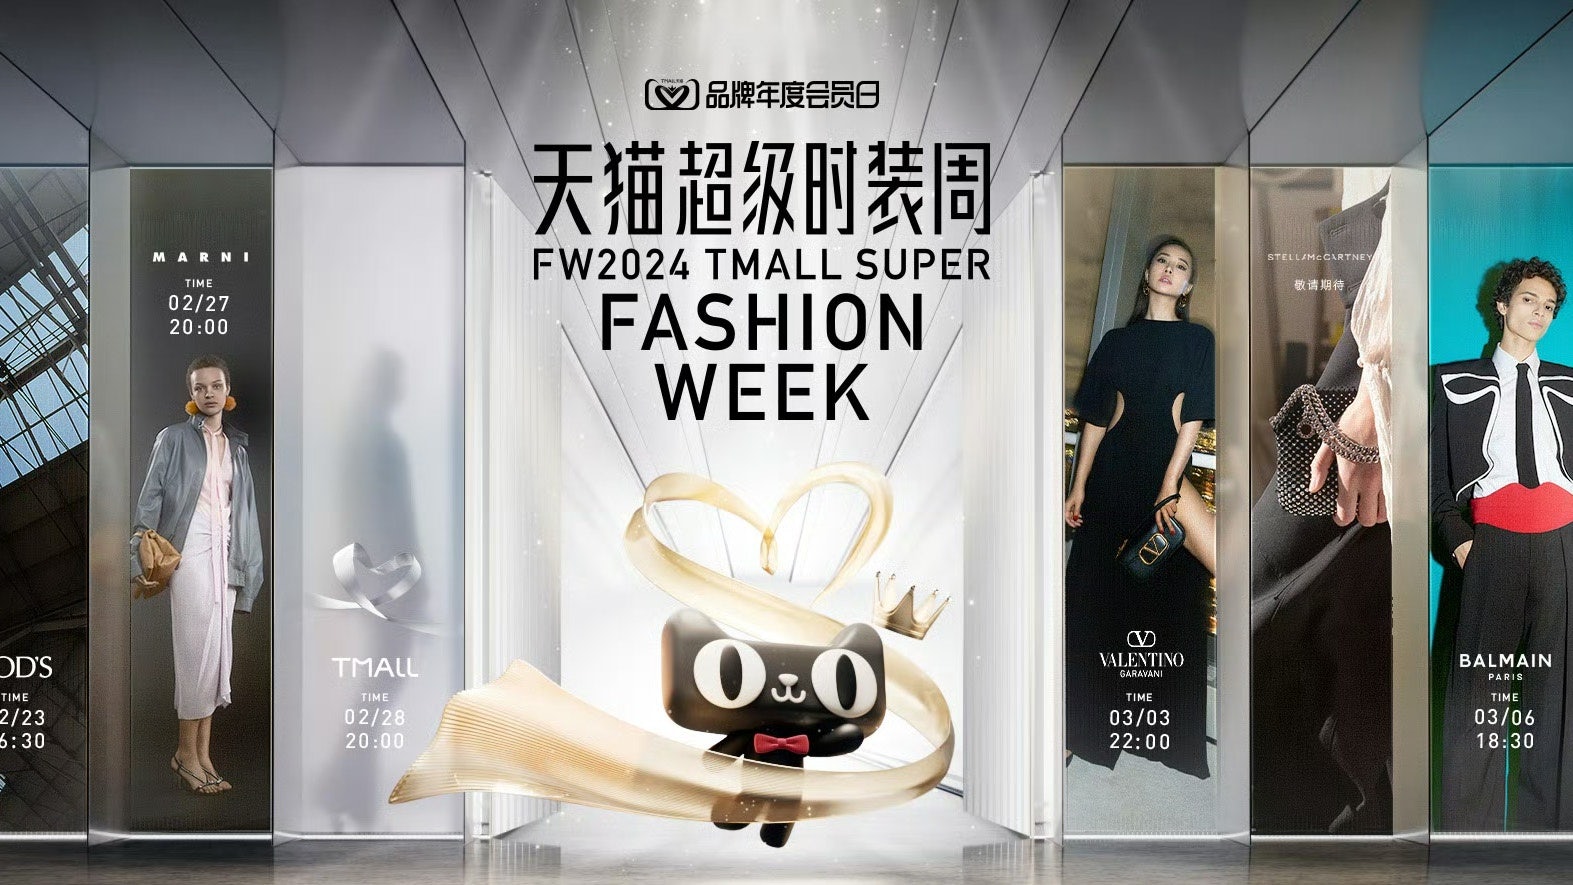 In February 2023, Tmall joined hands with Balenciaga, Marni, Valentino, and other luxury brands to launch its 2024 Tmall Super Fashion Week. Photo: Tmall Luxury Pavilion